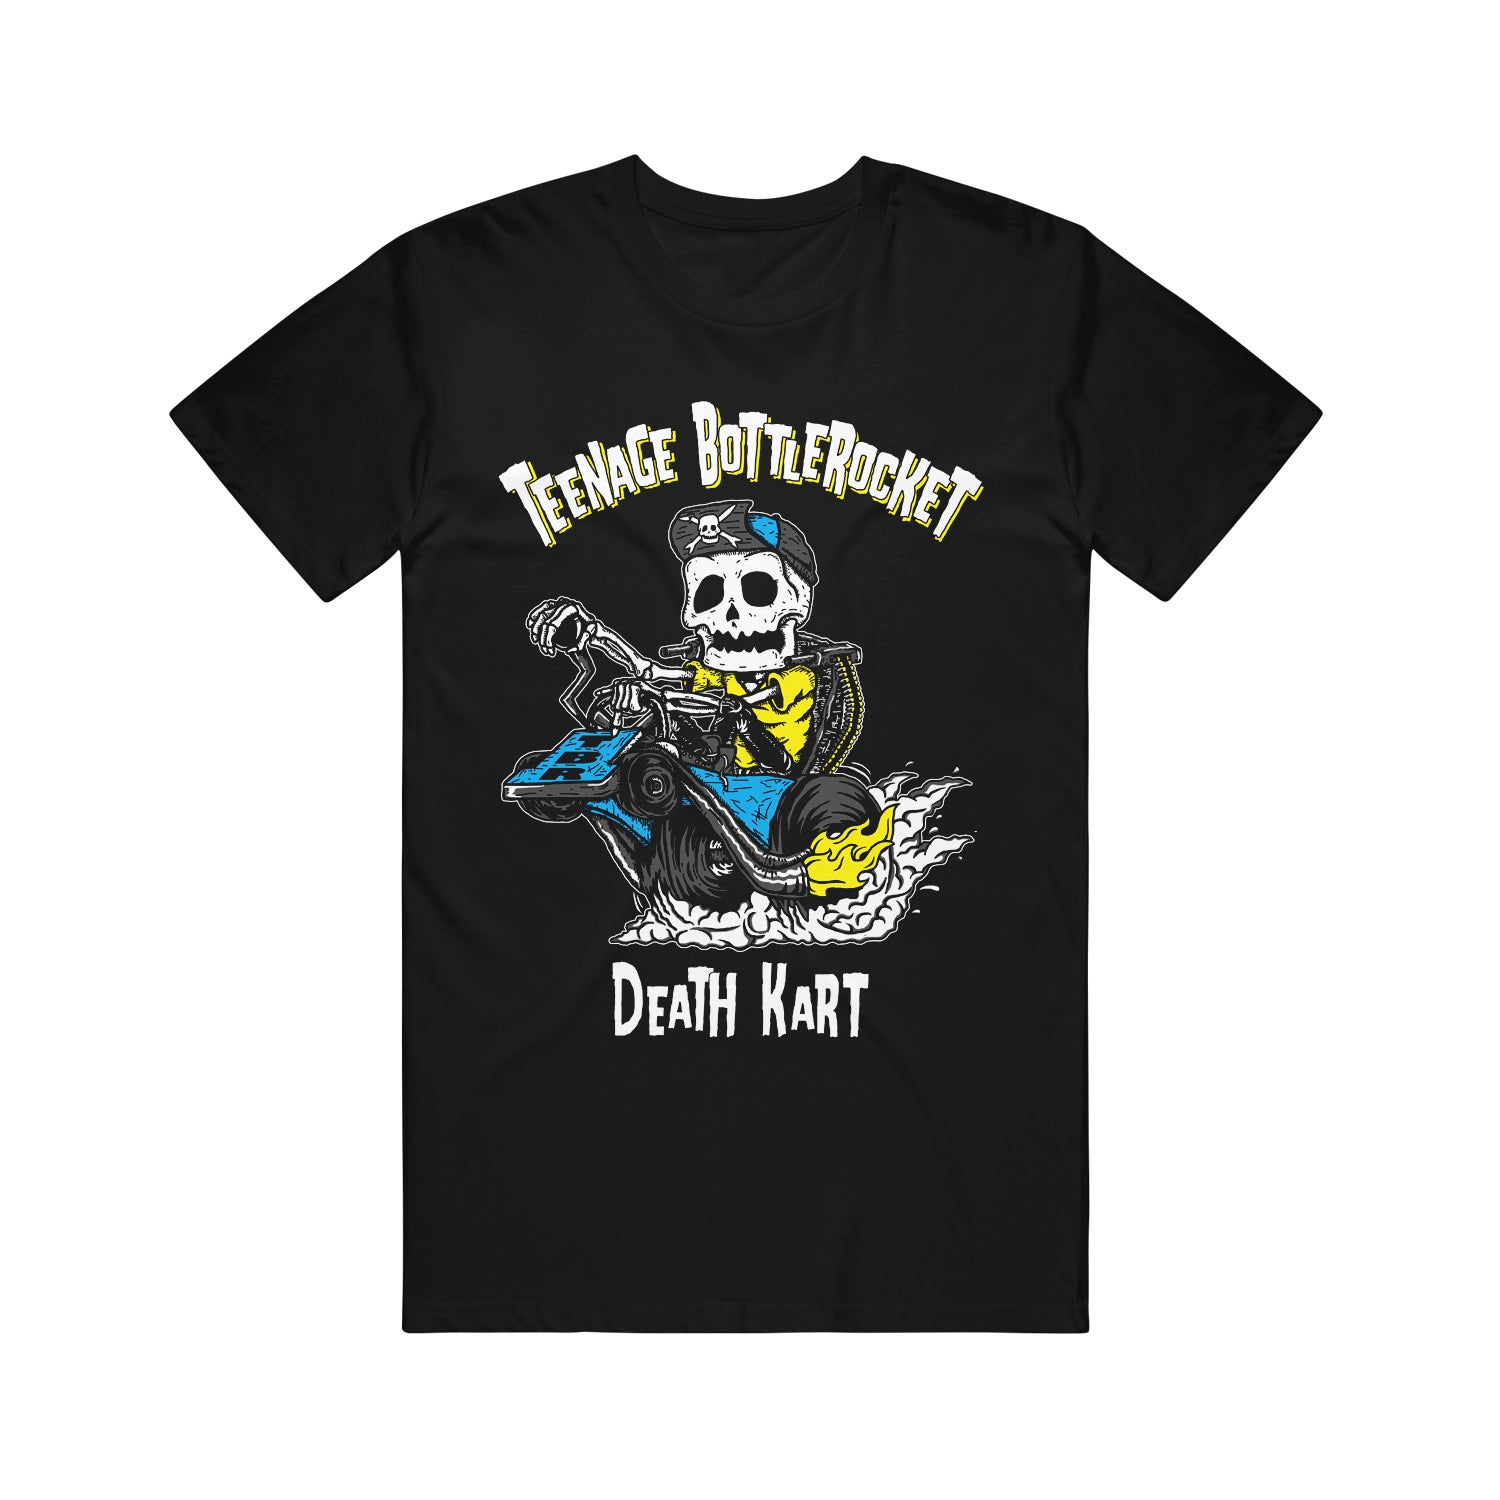 Image of a black tshirt against a white background. The tshirt says teenage bottlerocket across the chest in a half semi circle. Below that is a graphic of a pirate riding a blue gokart. The pirate has a yellow shirt and the gokart has a yellow flame coming out of it. Below this graphic it says Death kart in white text.  